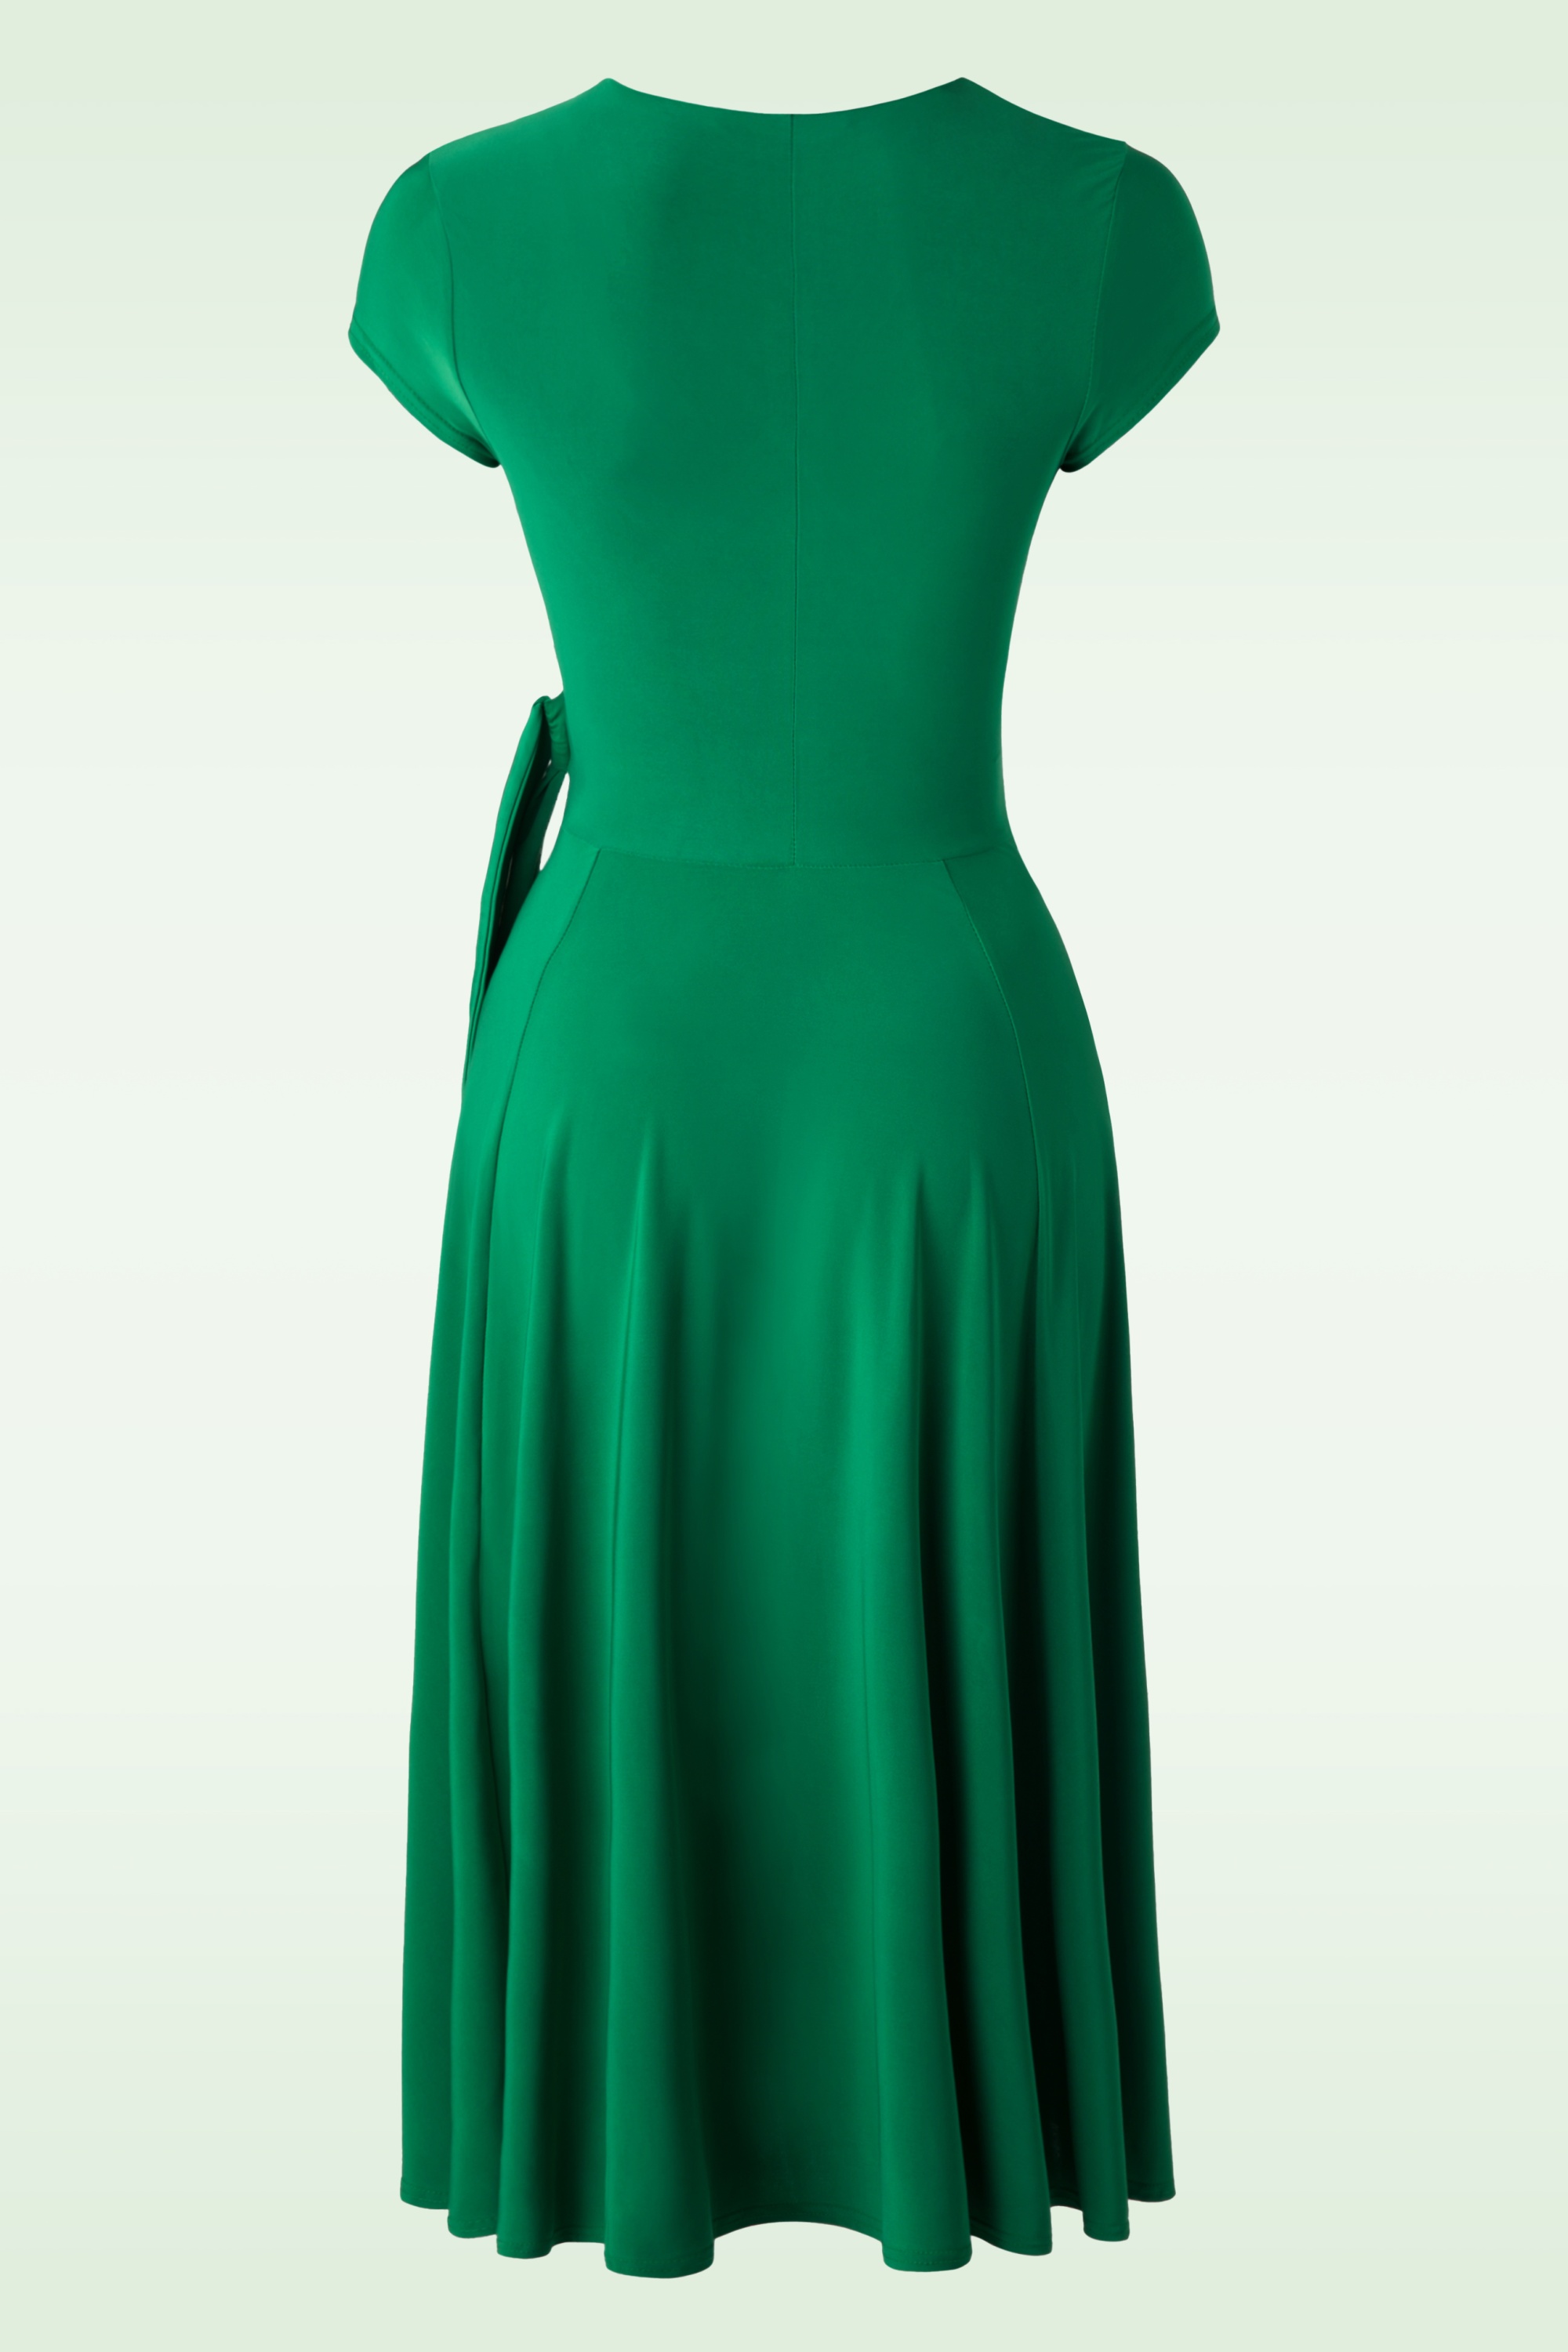 Vintage Chic for Topvintage - Layla Cross Over jurk in groen 4